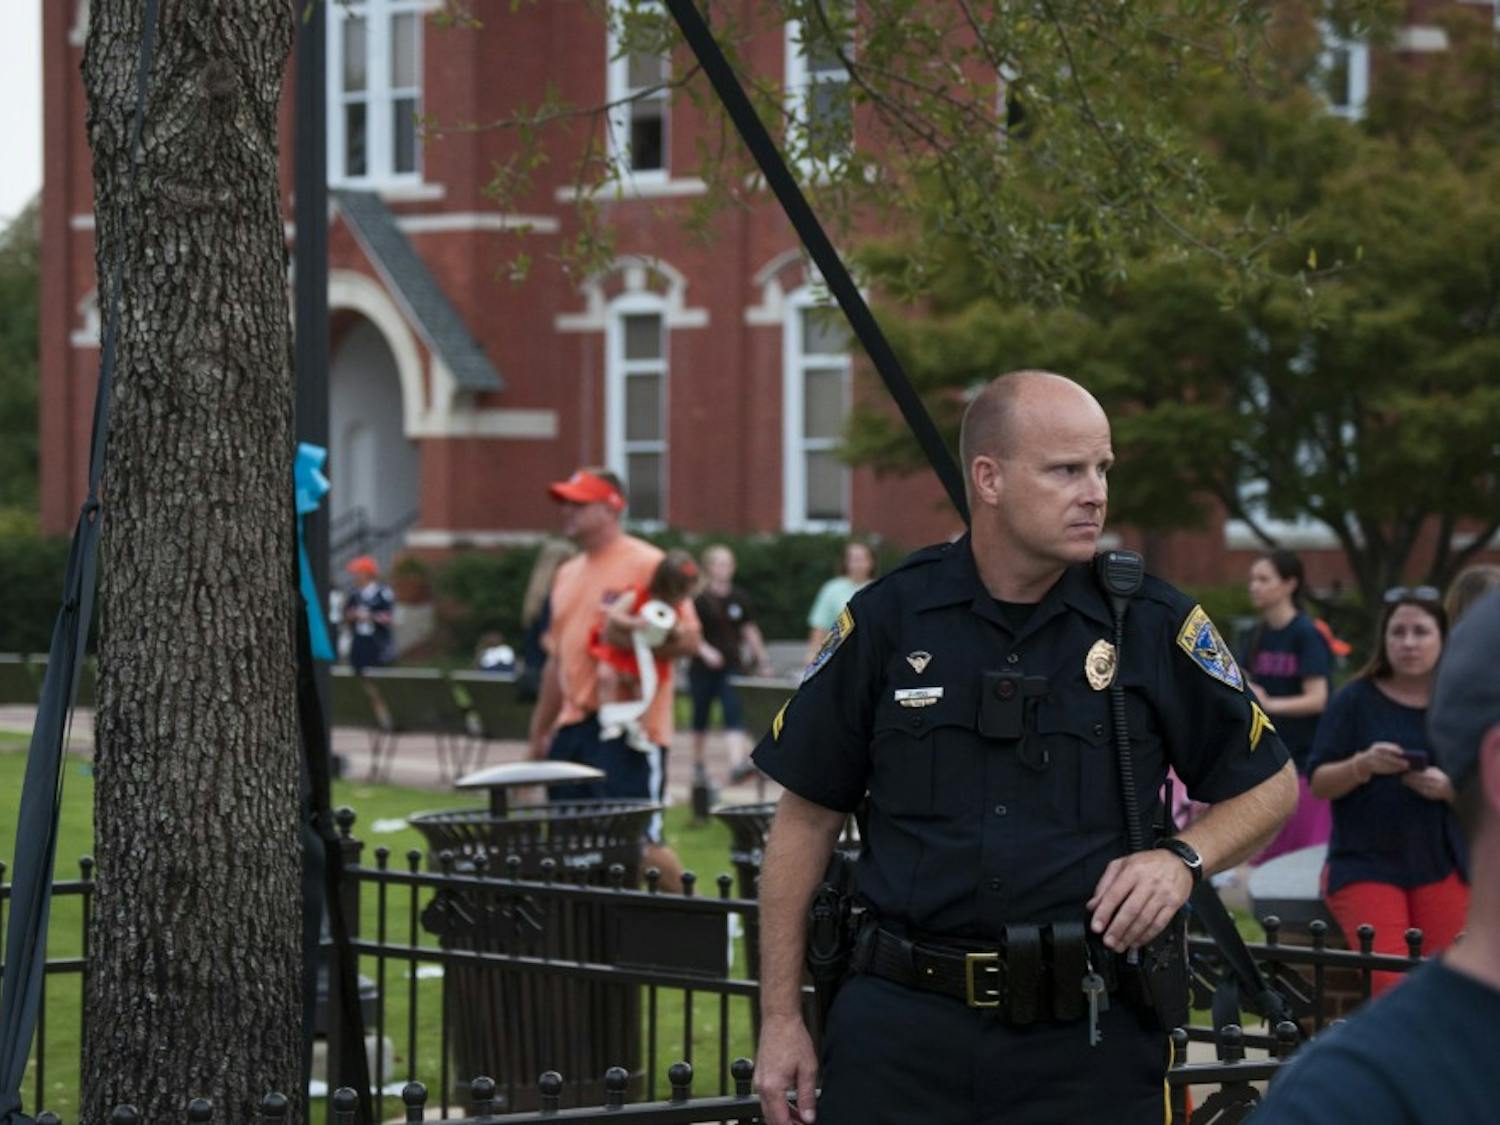 Police officers protecting Toomer's Oaks. Fans will be able to roll the trees next year. (Jordan Hays | Managing Editor)